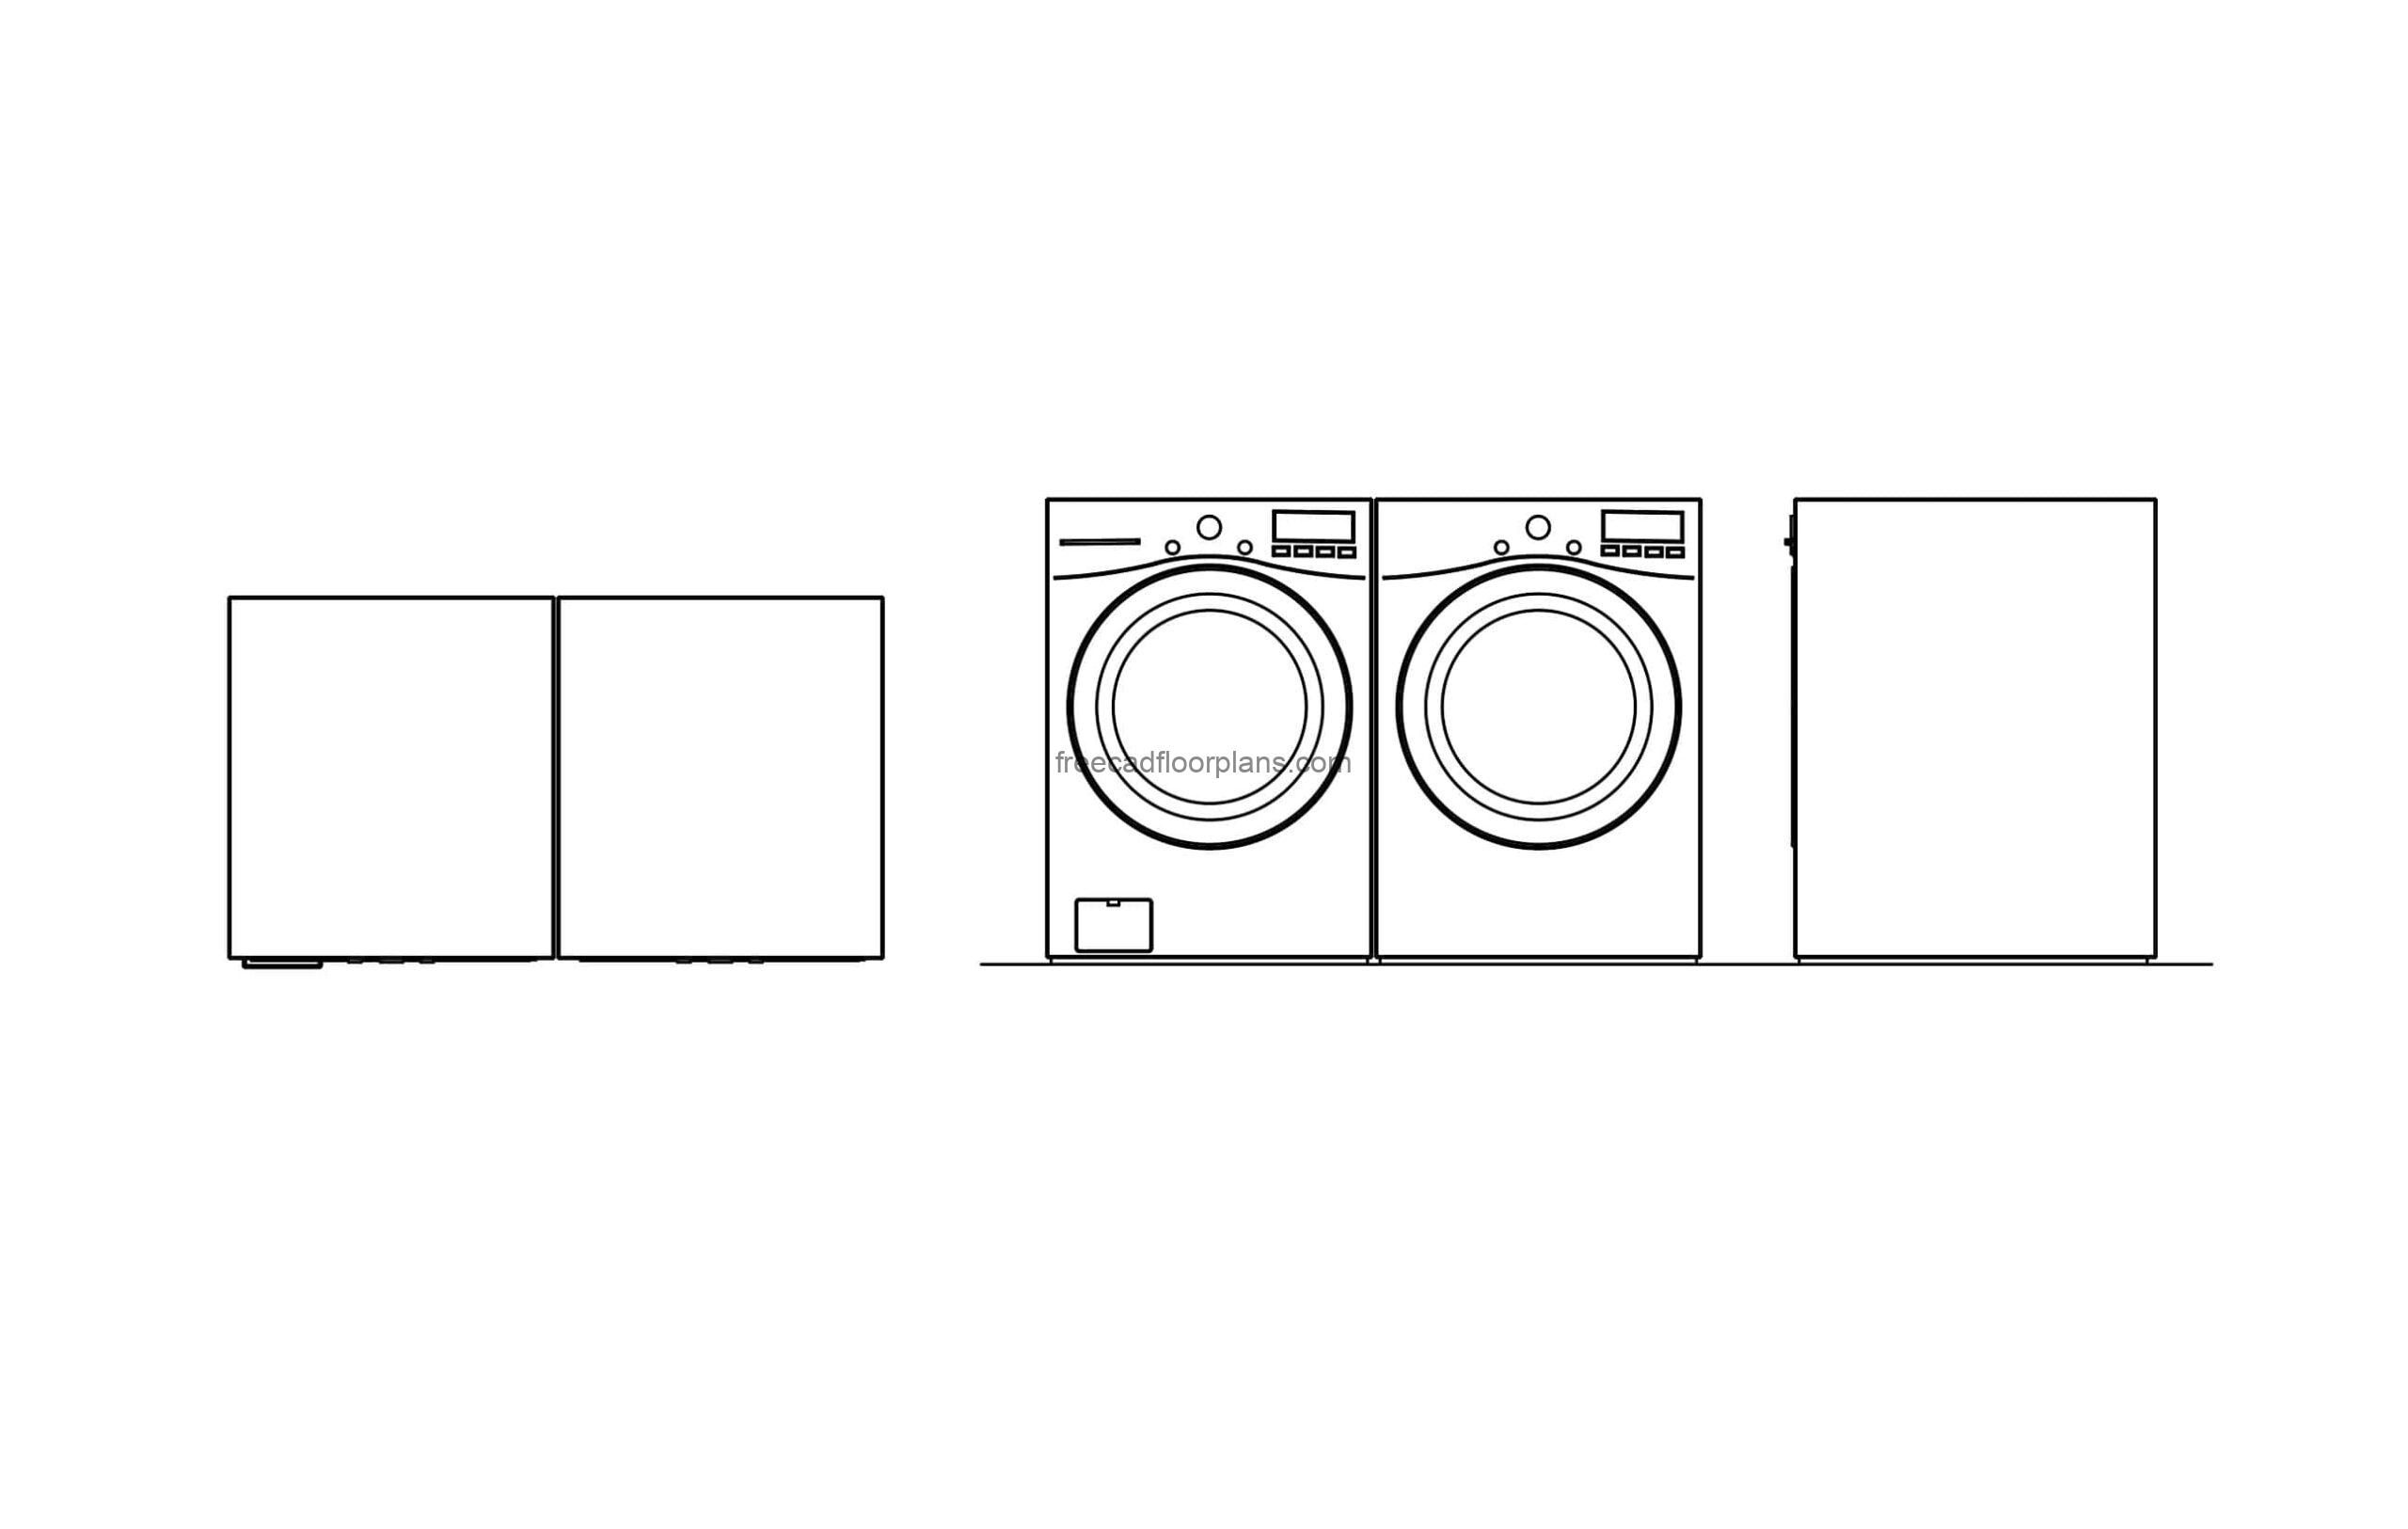 LG Washer & Dryer dwg model cad block with all 2D views include